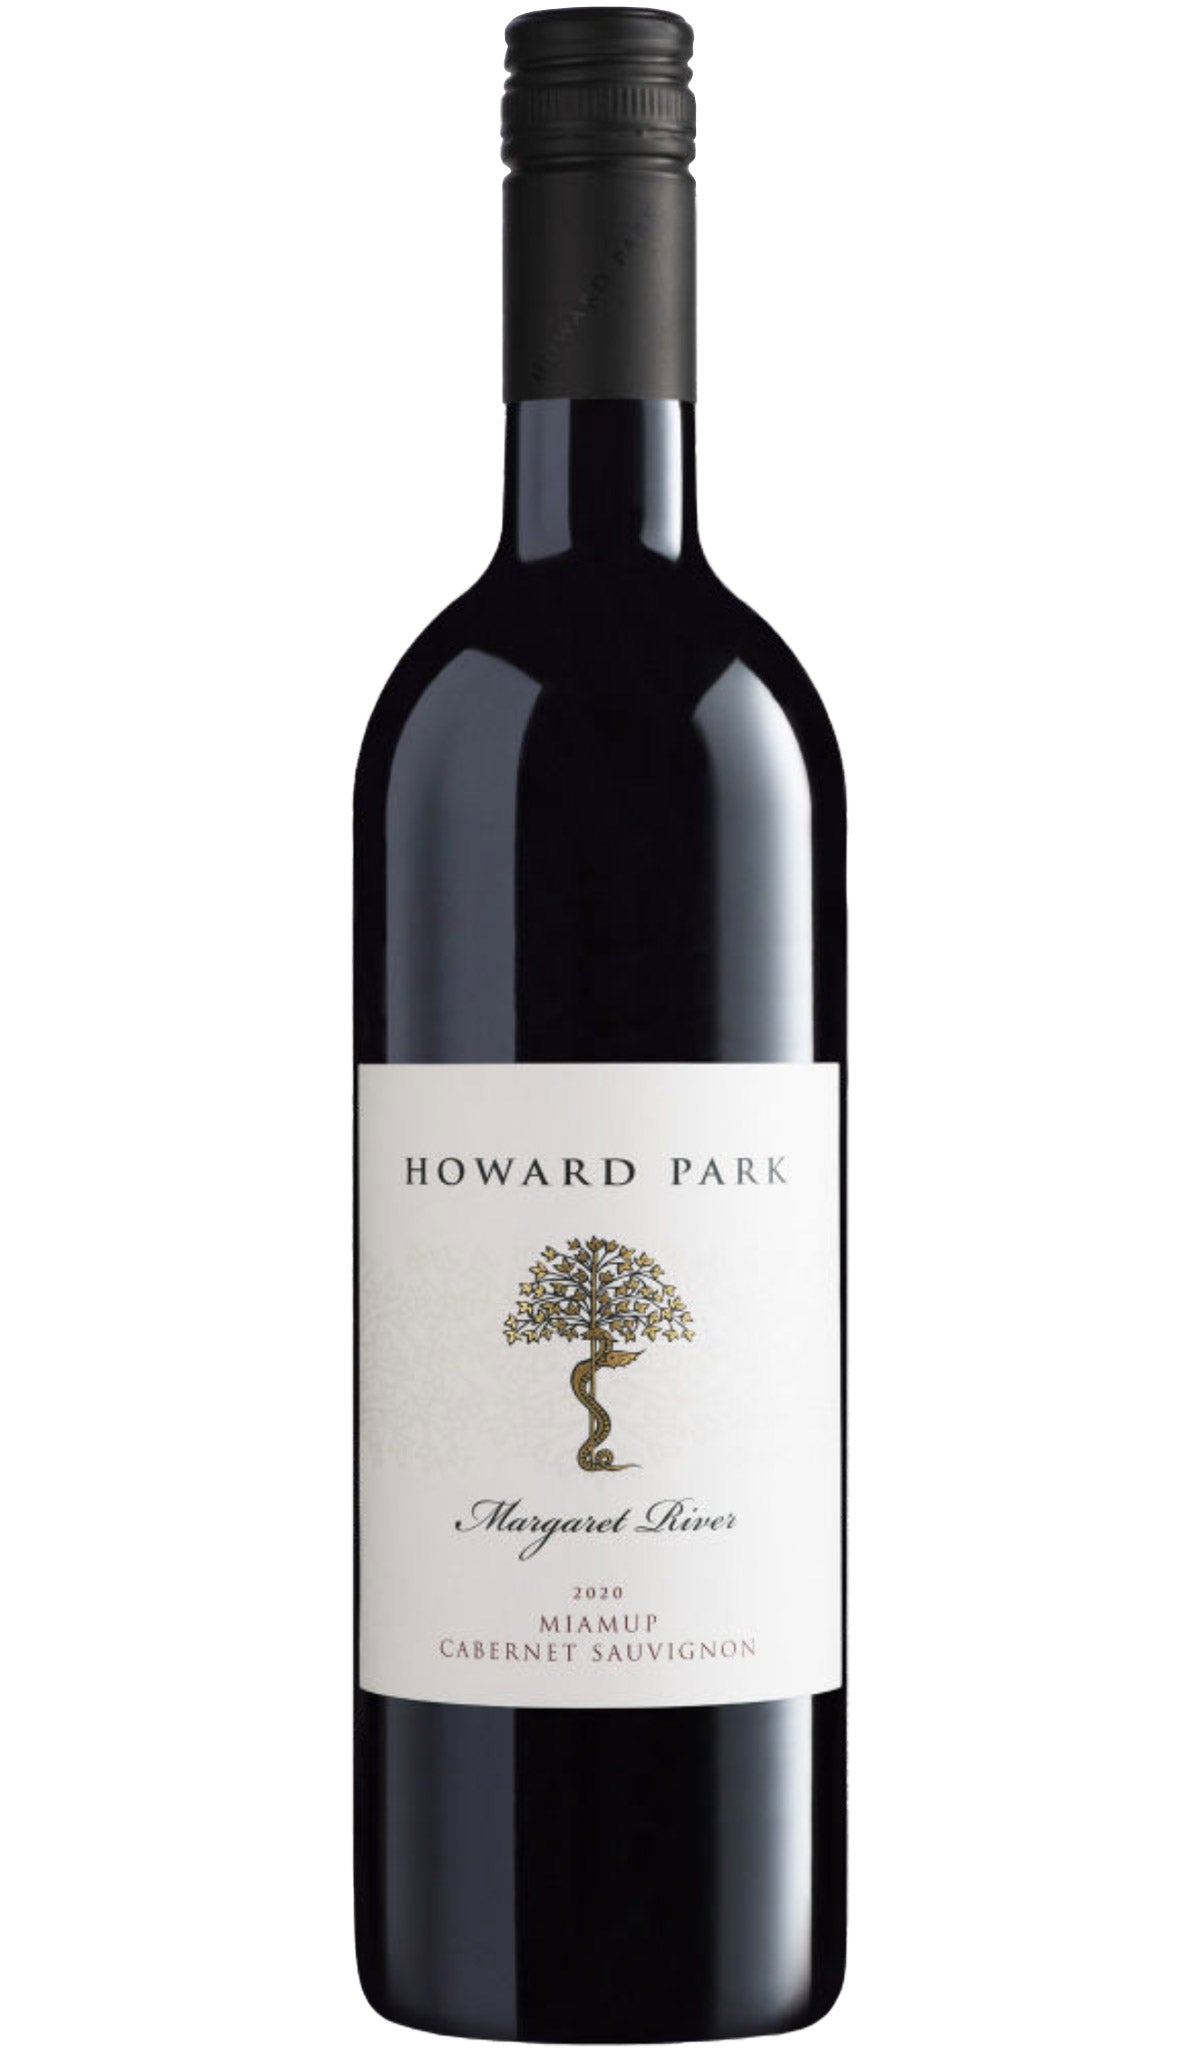 Find out more or buy Howard Park Miamup Cabernet Sauvignon 2020 (Margaret River) online at Wine Sellers Direct - Australia’s independent liquor specialists.